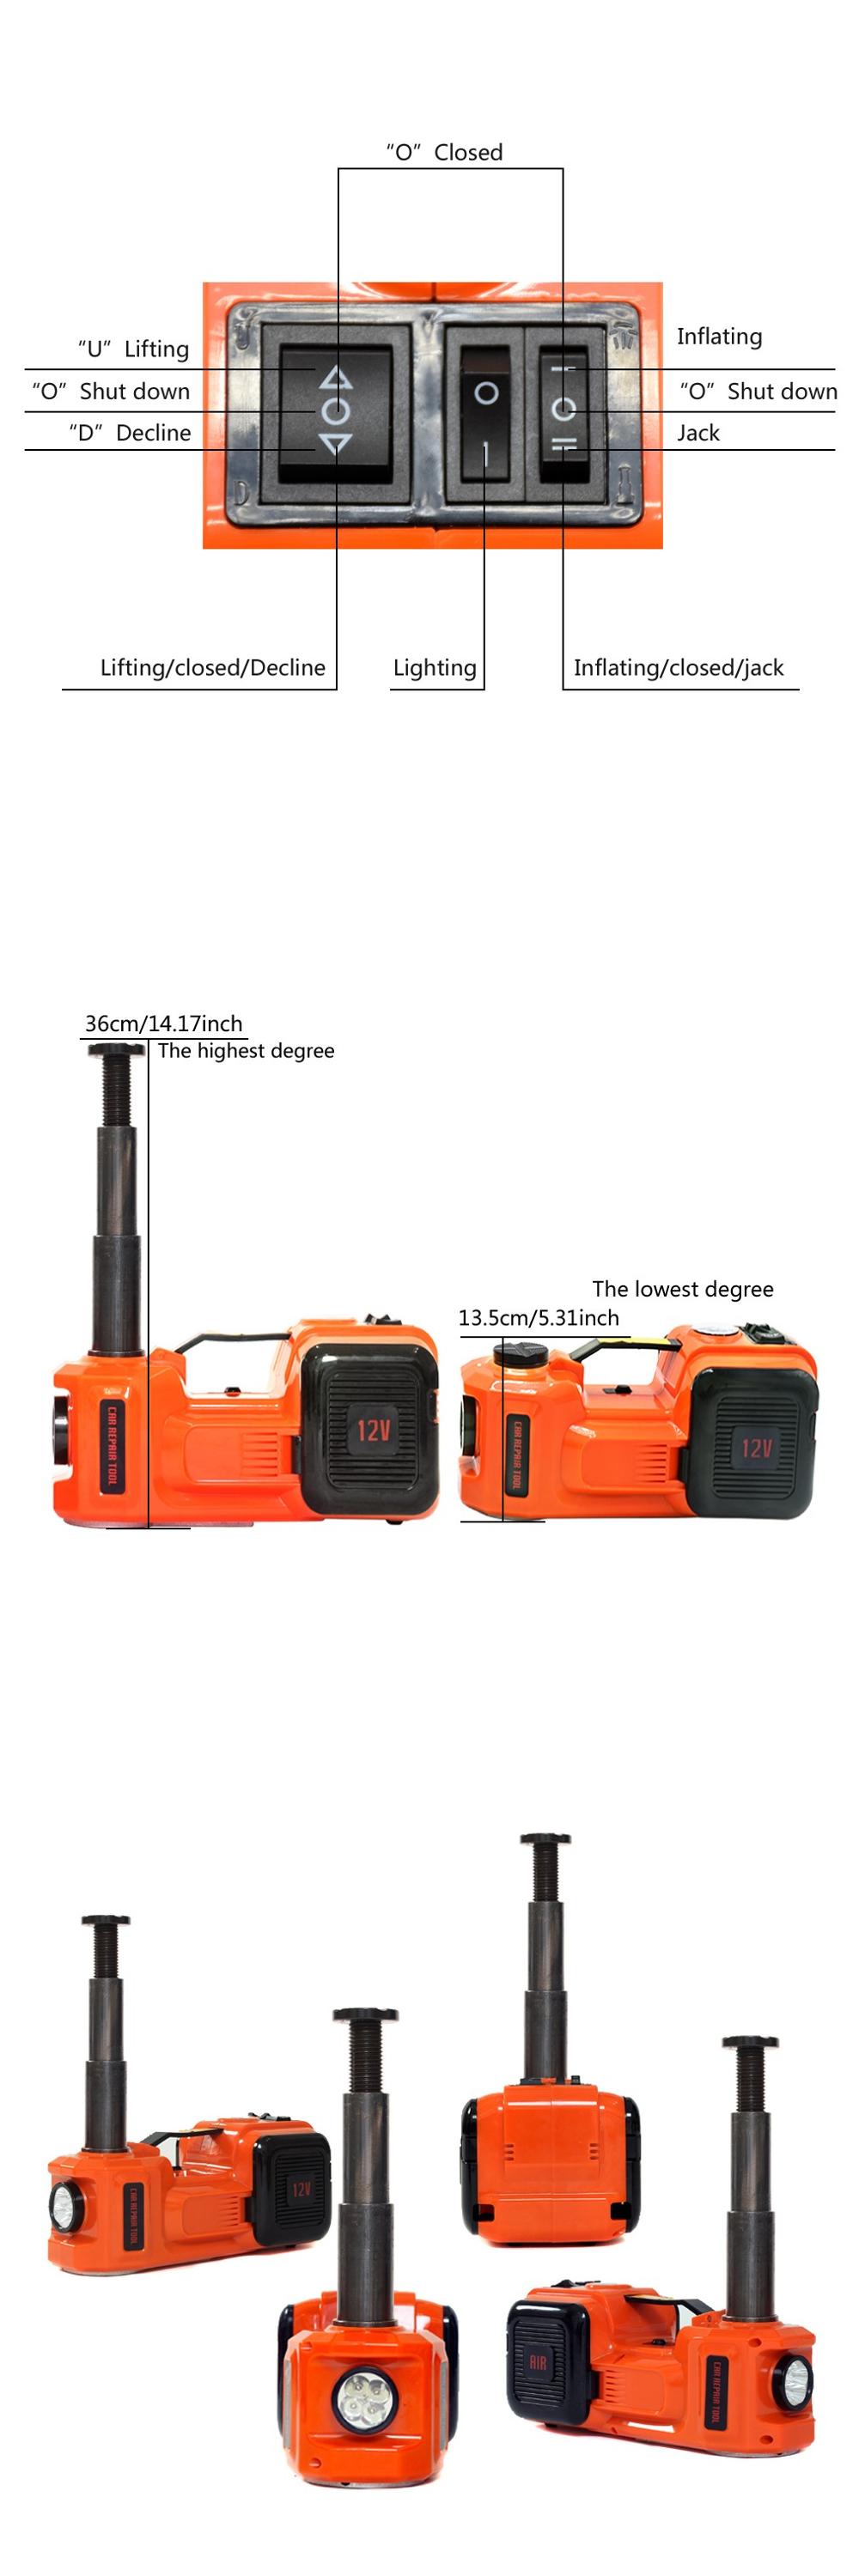 New arrival repair kit 12 volt car motorized DC 12V 5T Multi-functional hydraulic floor jack with electric impact wrench